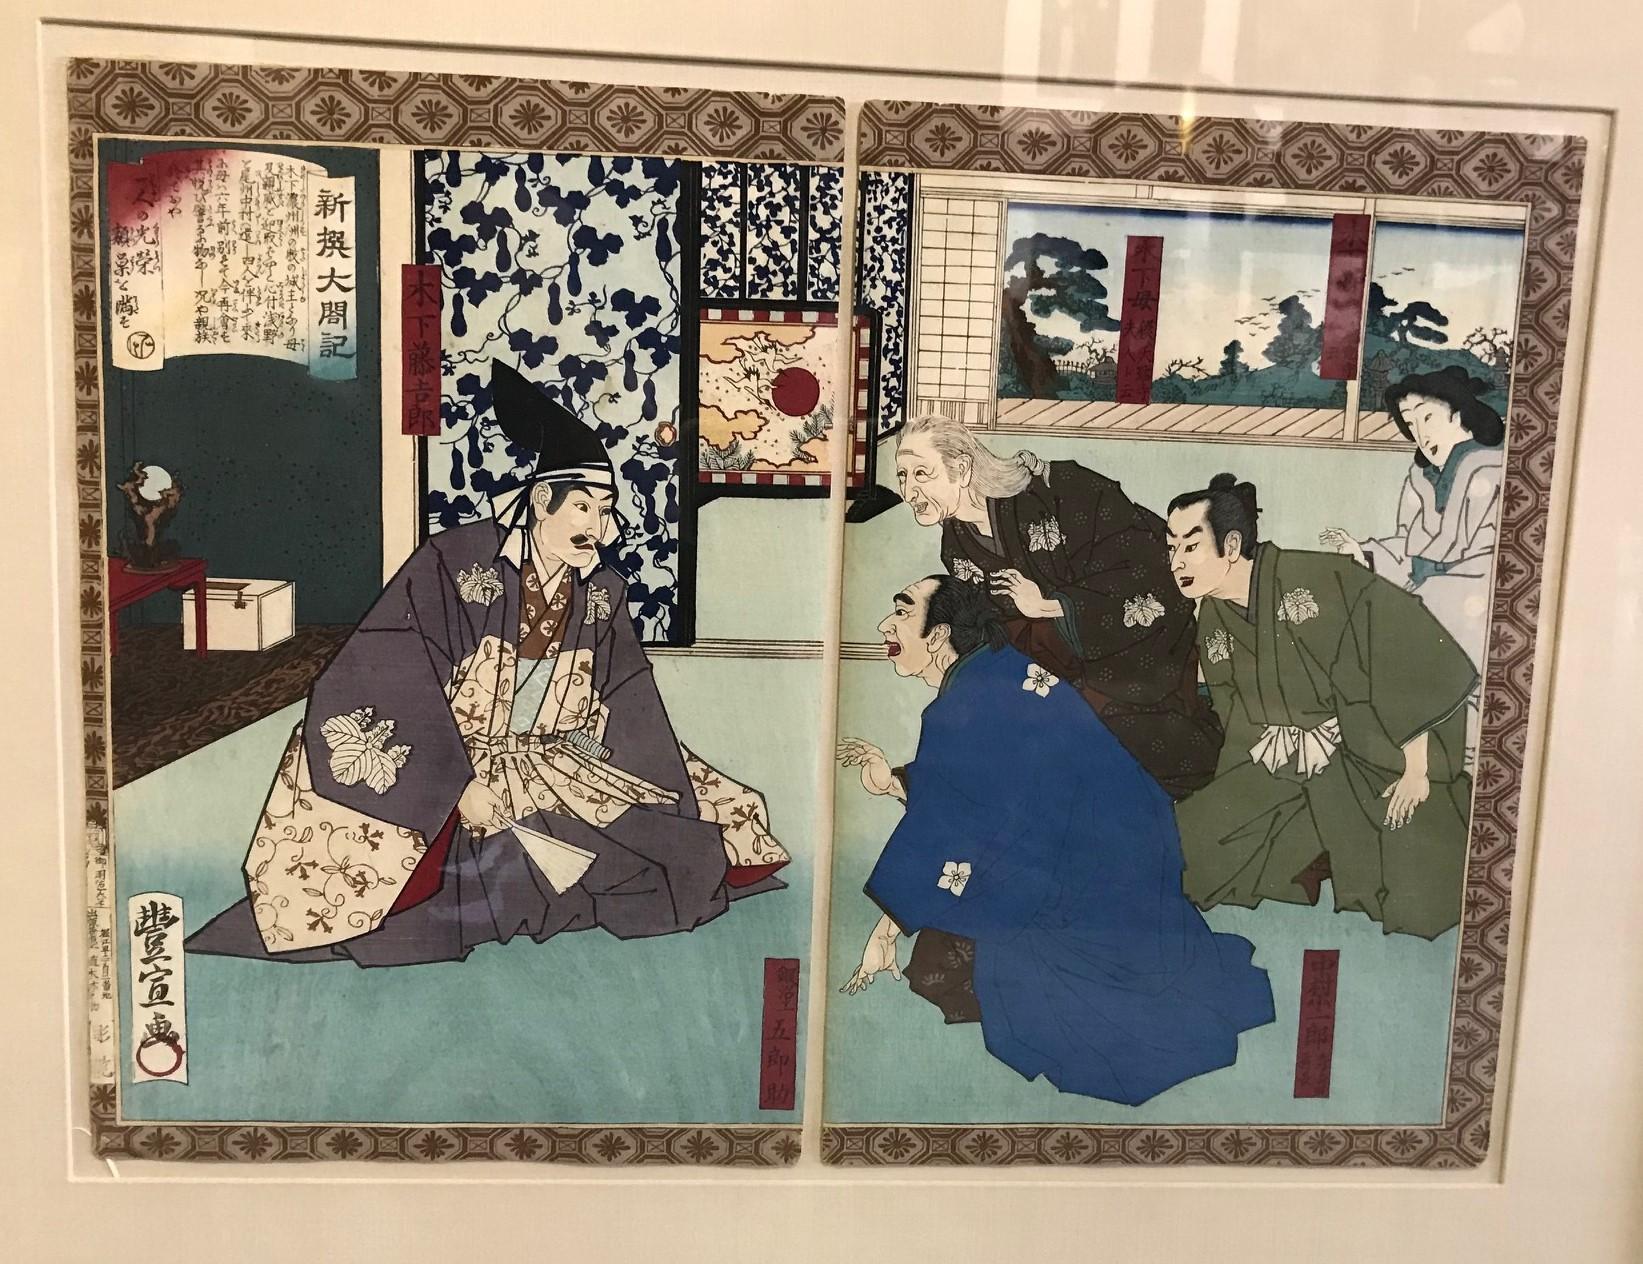 A Classic image by renowned Japanese printmaker Utagawa Toyonobu from his newly selected history of Toyotomi Hideyoshi series.

A very good impression, condition, and color. Professionally framed by high-end Los Angeles framer Jerry Solomon.